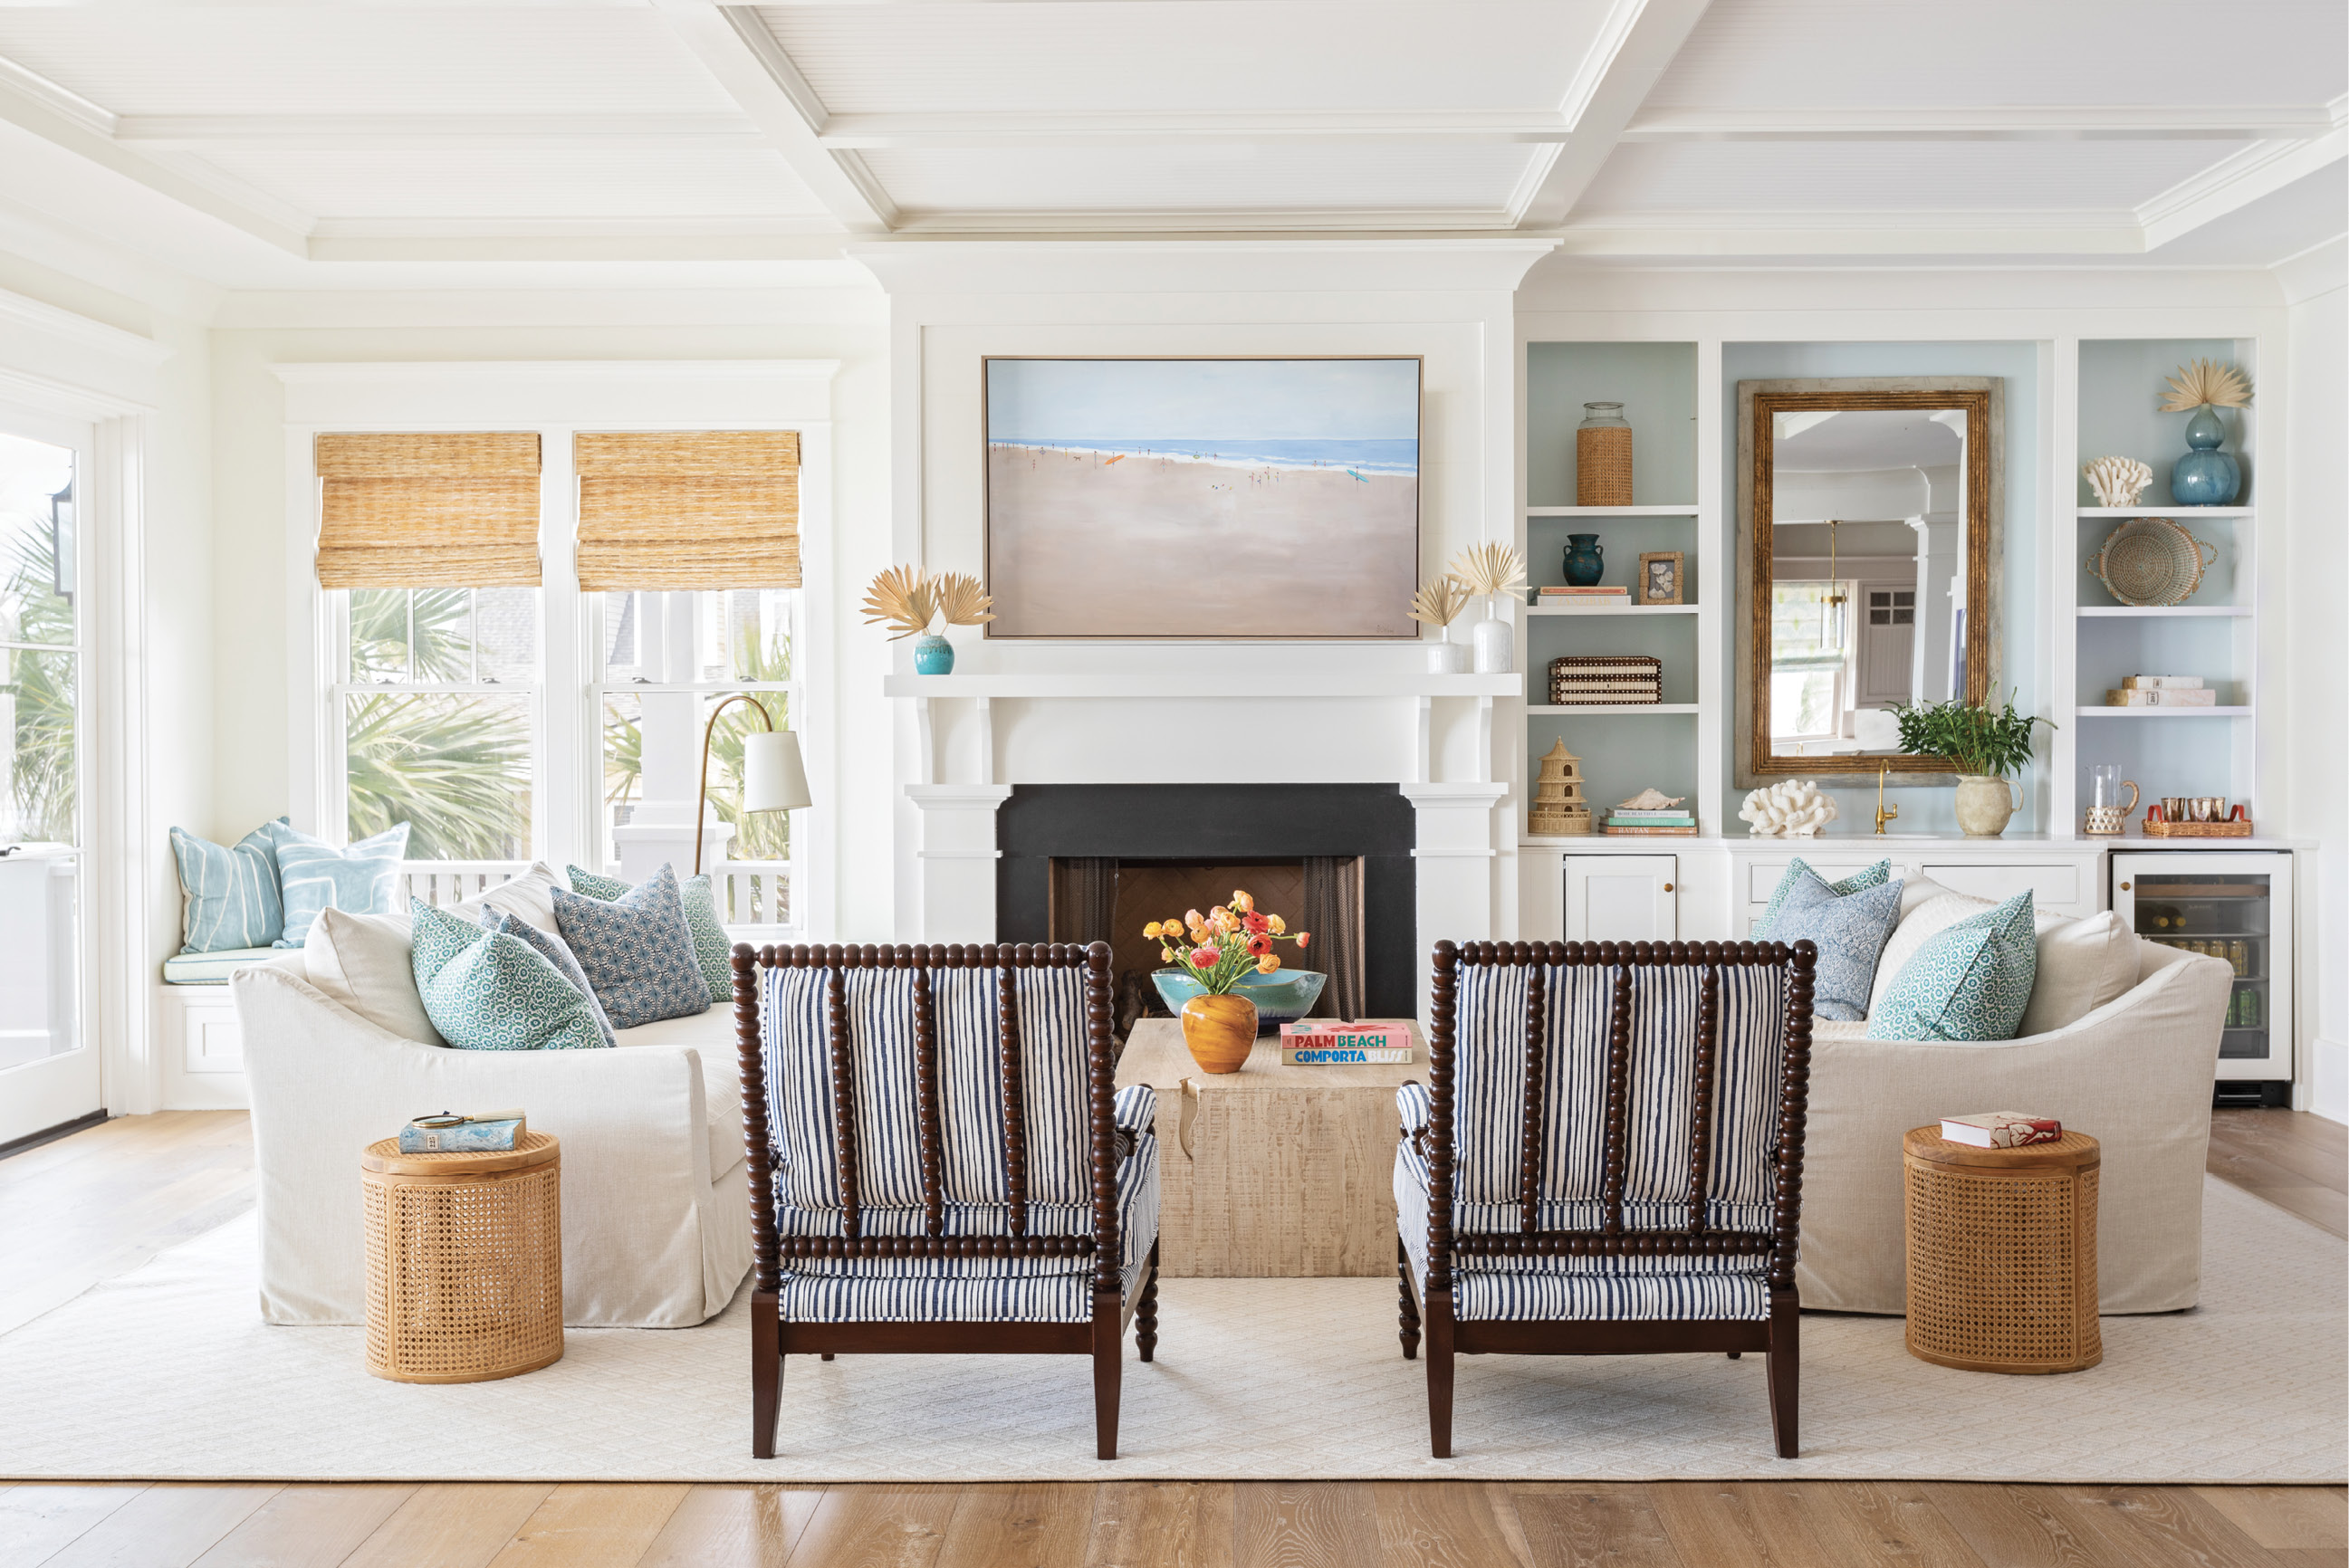 OCEANSIDE OASIS: In the heart of the home, natural elements—like a wooden coffee table from Celadon, cane end tables from GDC Home, and a wool rug—mix with performance fabric-outfitted furnishings for an unfussy, beach-friendly vibe. A beach scene by Shannon Wood, pillows from Celadon, and the wet bar’s back wall—painted Benjamin Moore’s “Ocean Air”—underscore the sea-inspired palette.